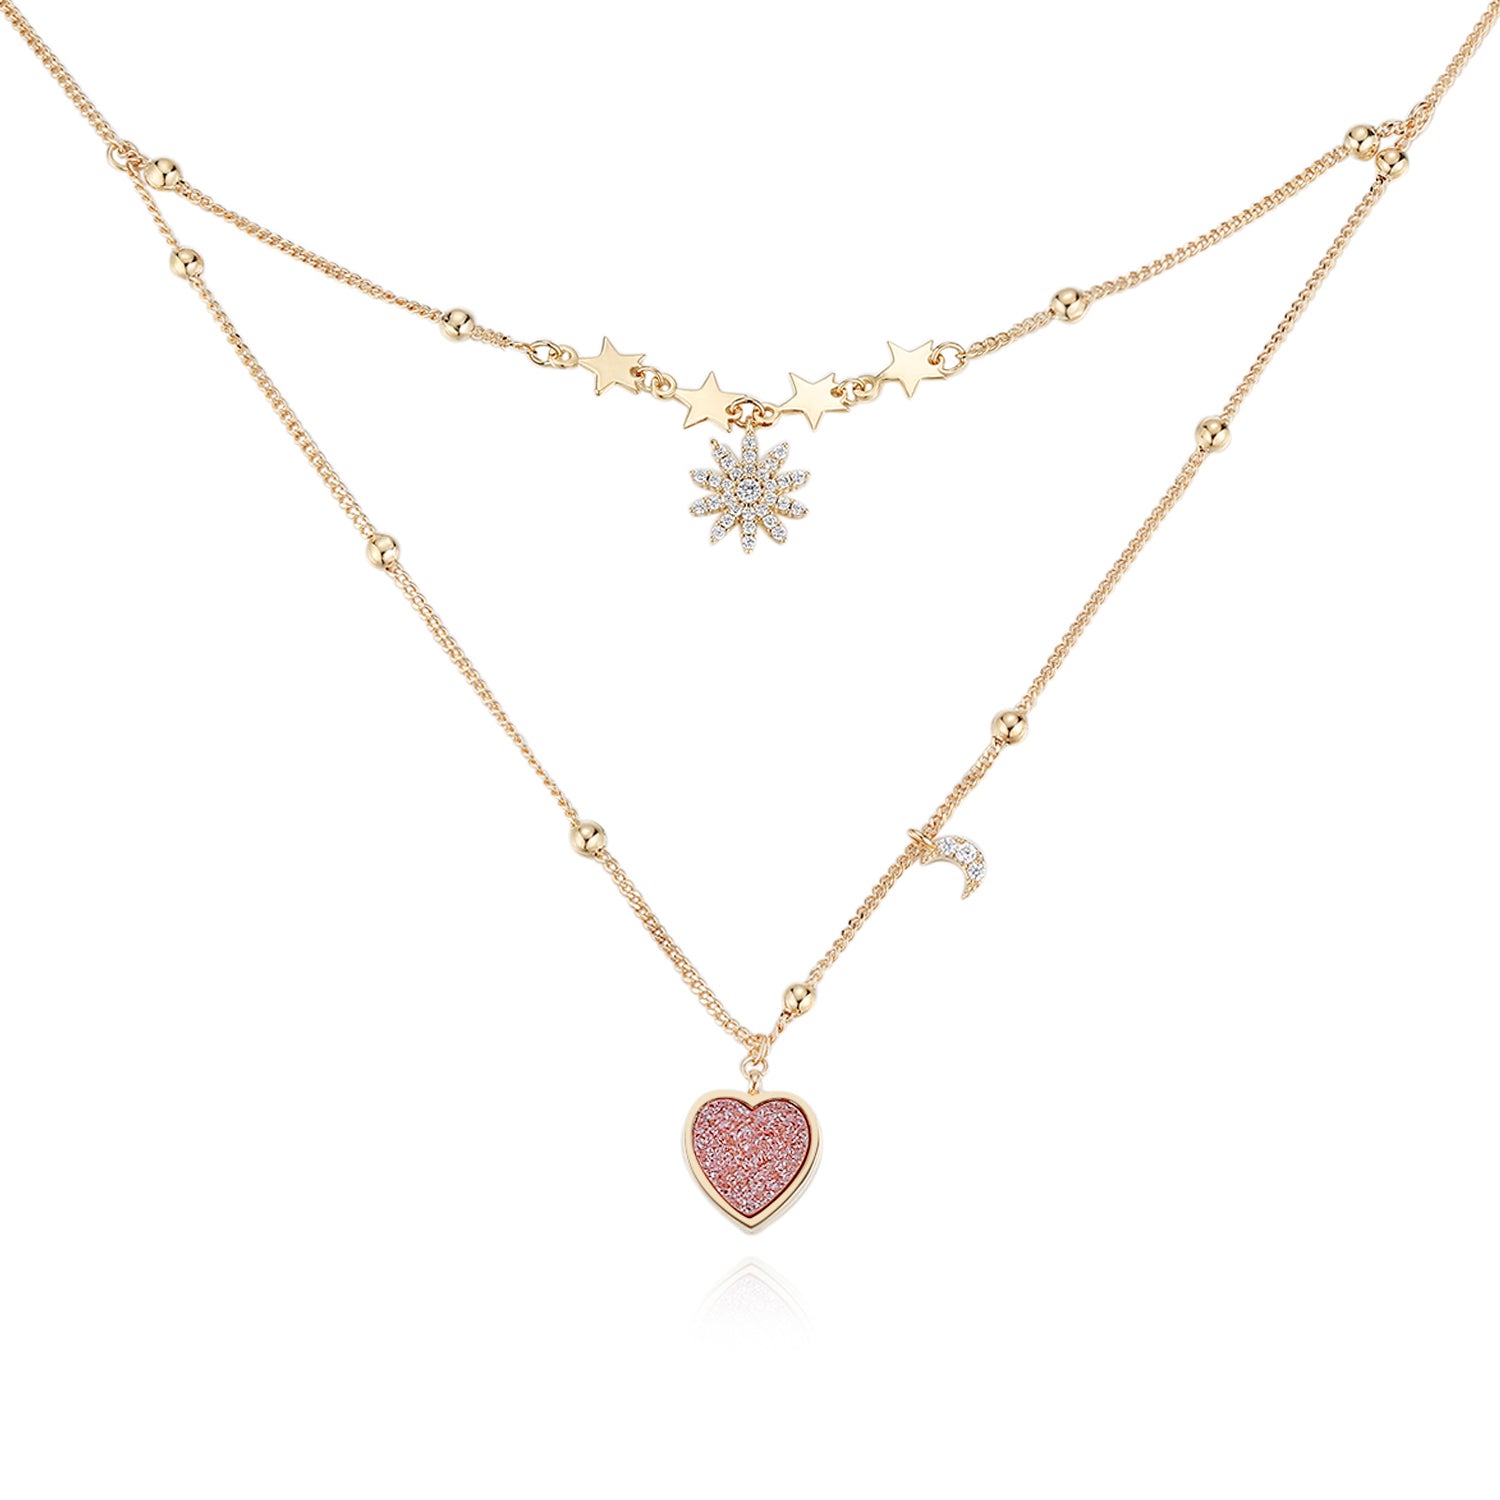 Pink Druzy Gold Layered Necklace - Love Note